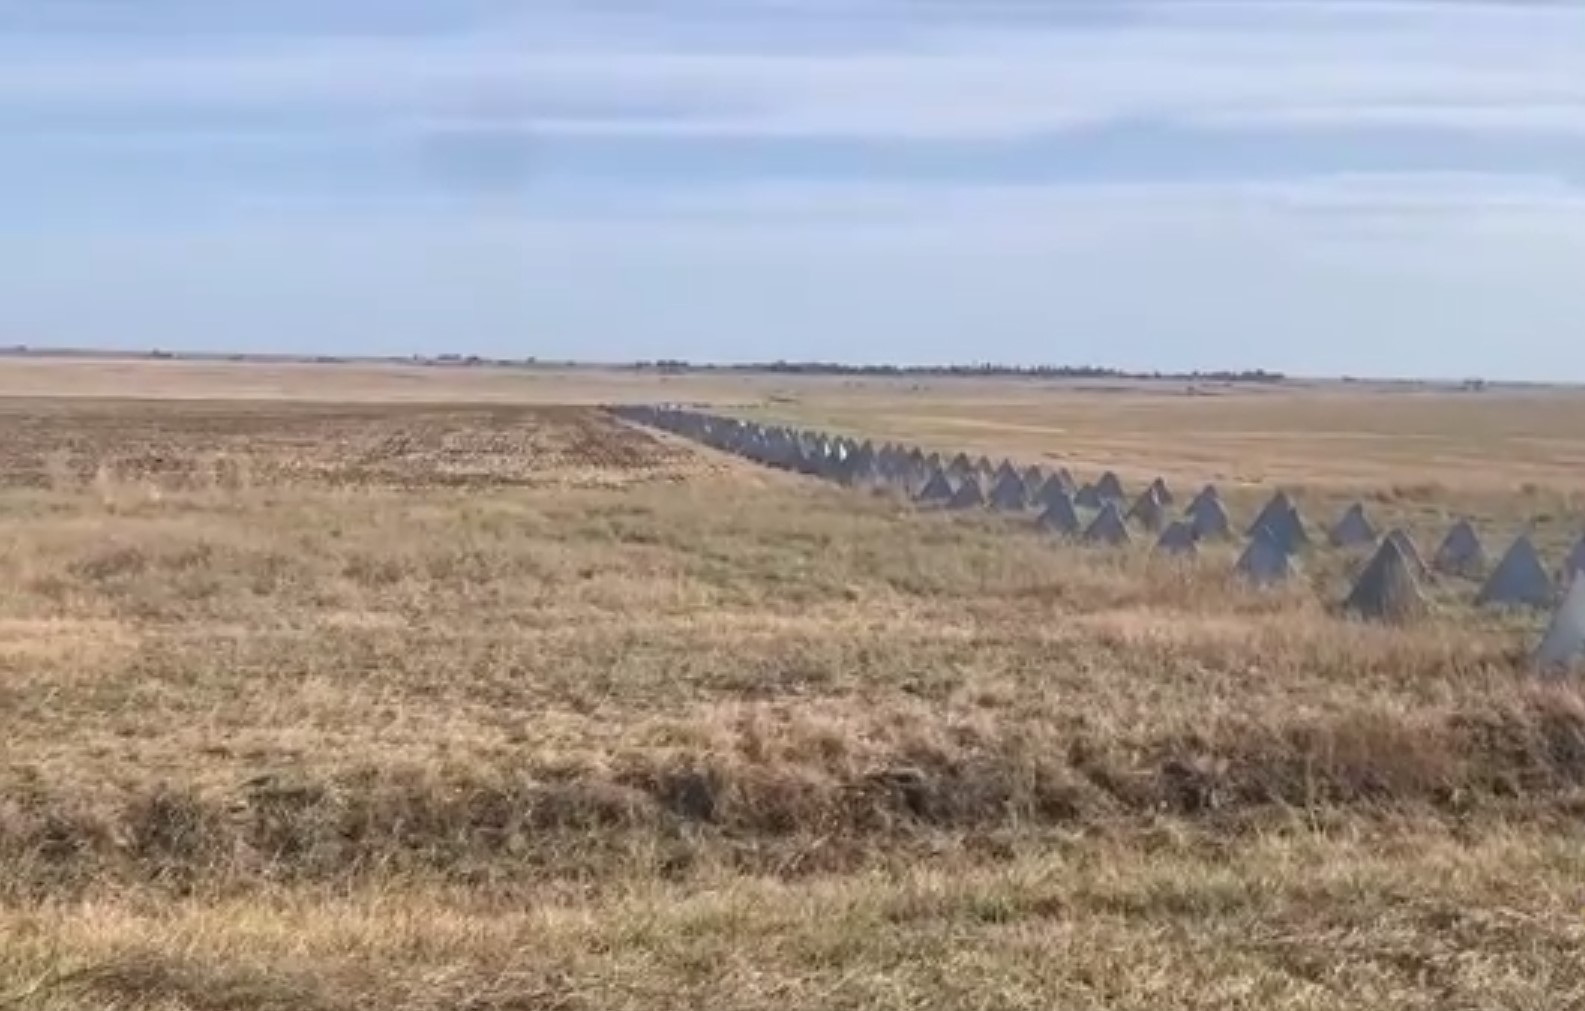 Russia is reinforcing Crimea: partisans have spotted the "dragon's teeth" and the transfer of air defense